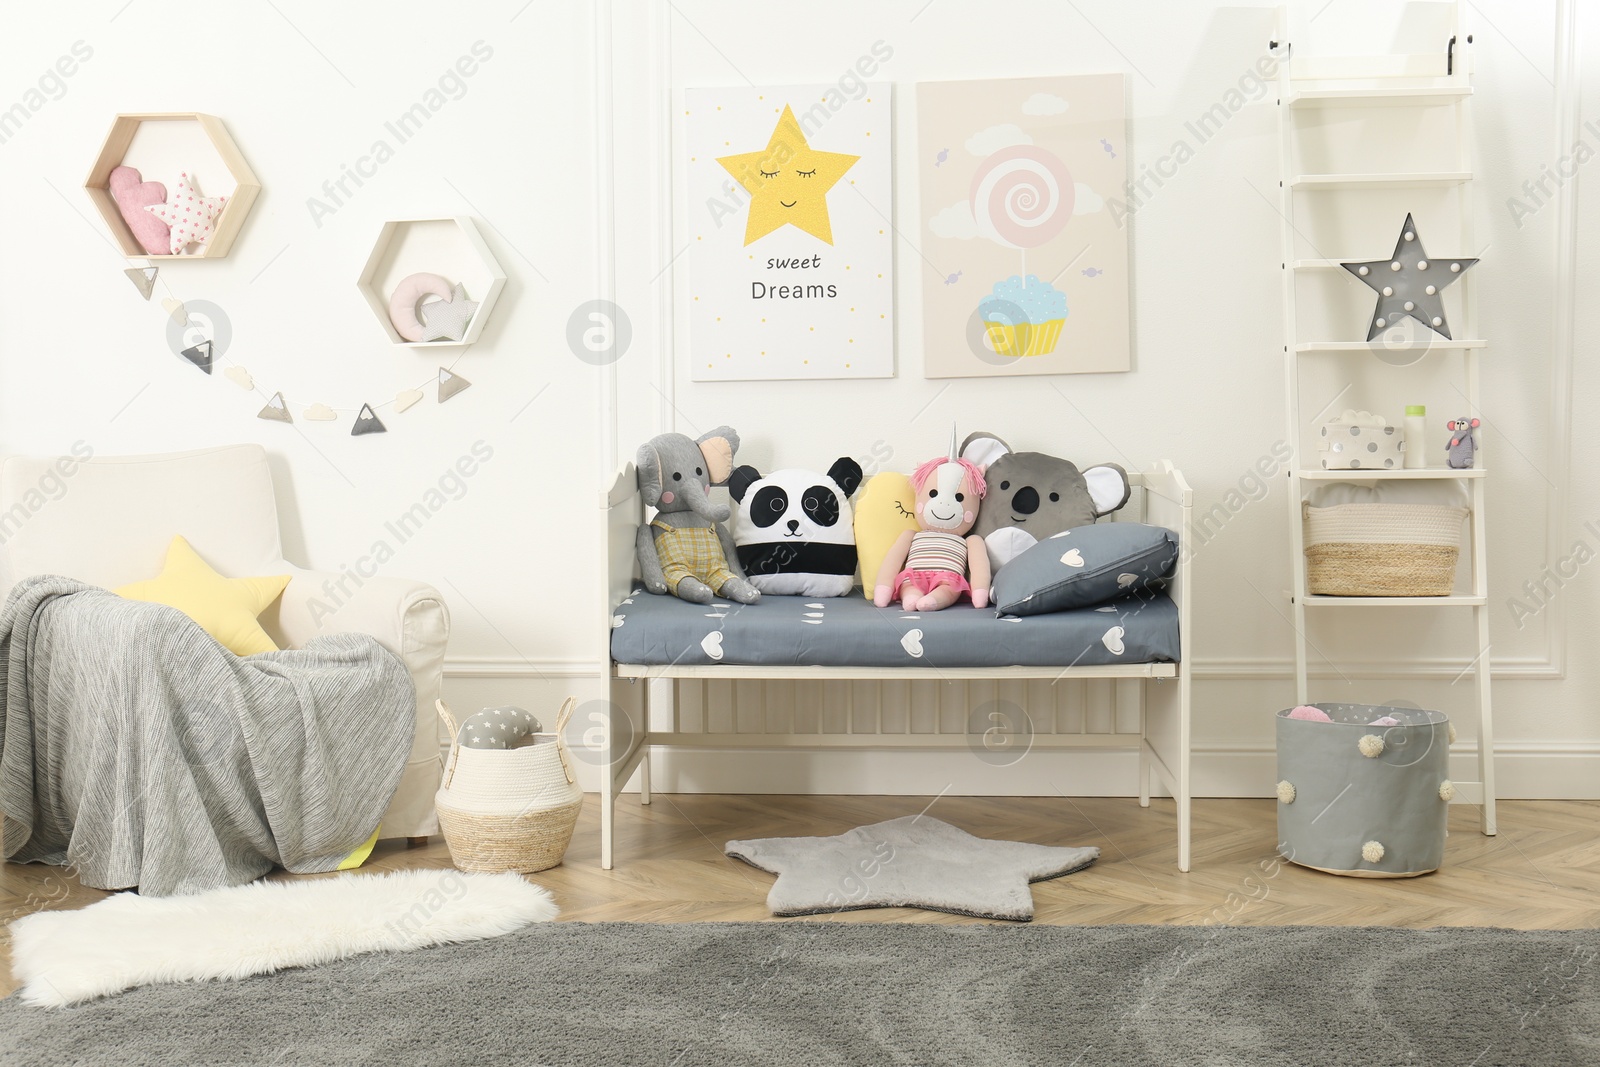 Photo of Child room interior with toys and stylish furniture